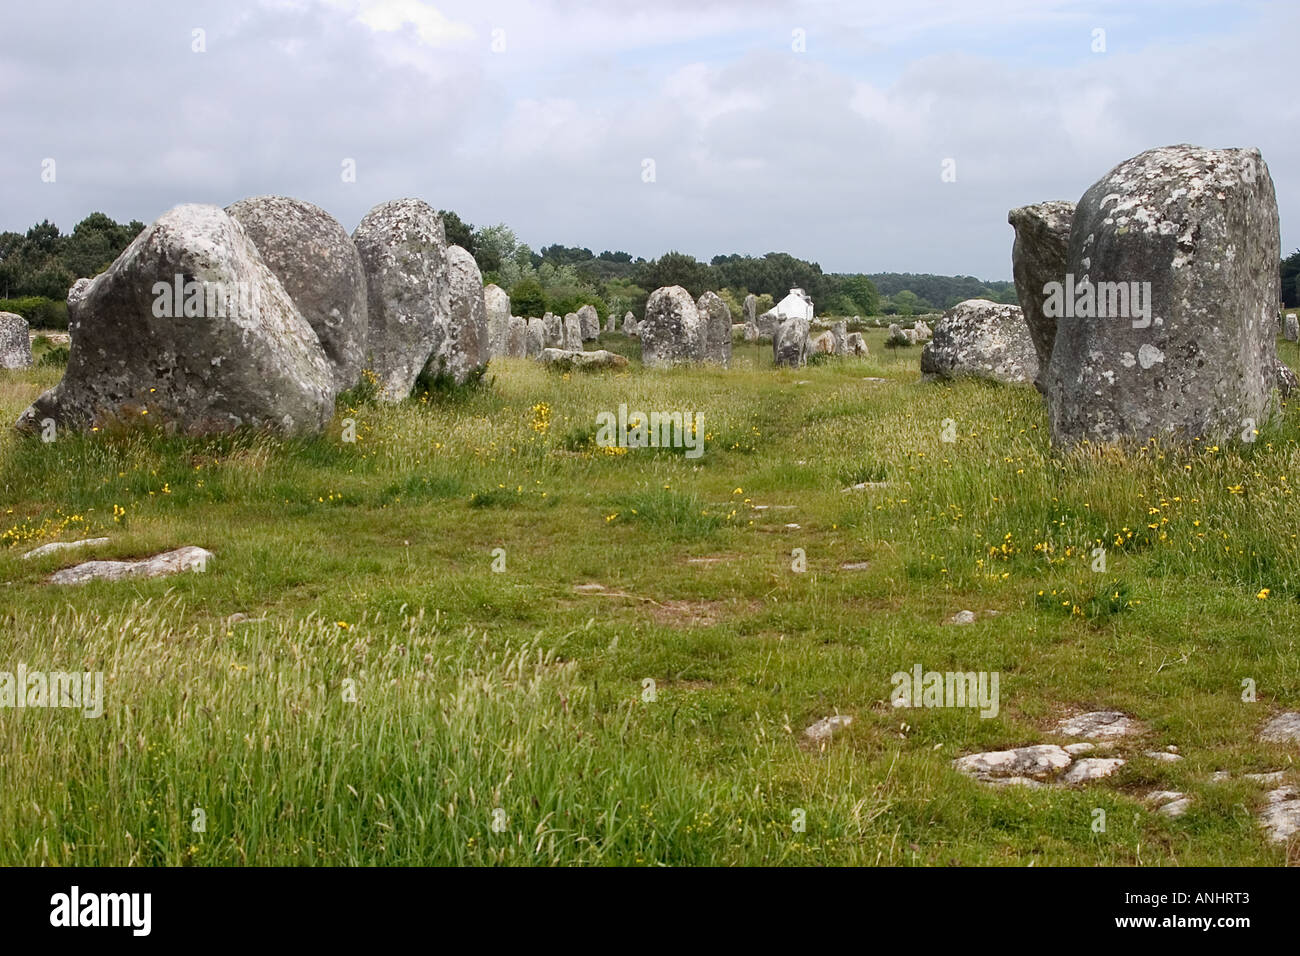 Standing Stone or menhir, Carnac, Brittany, France Stock Photo